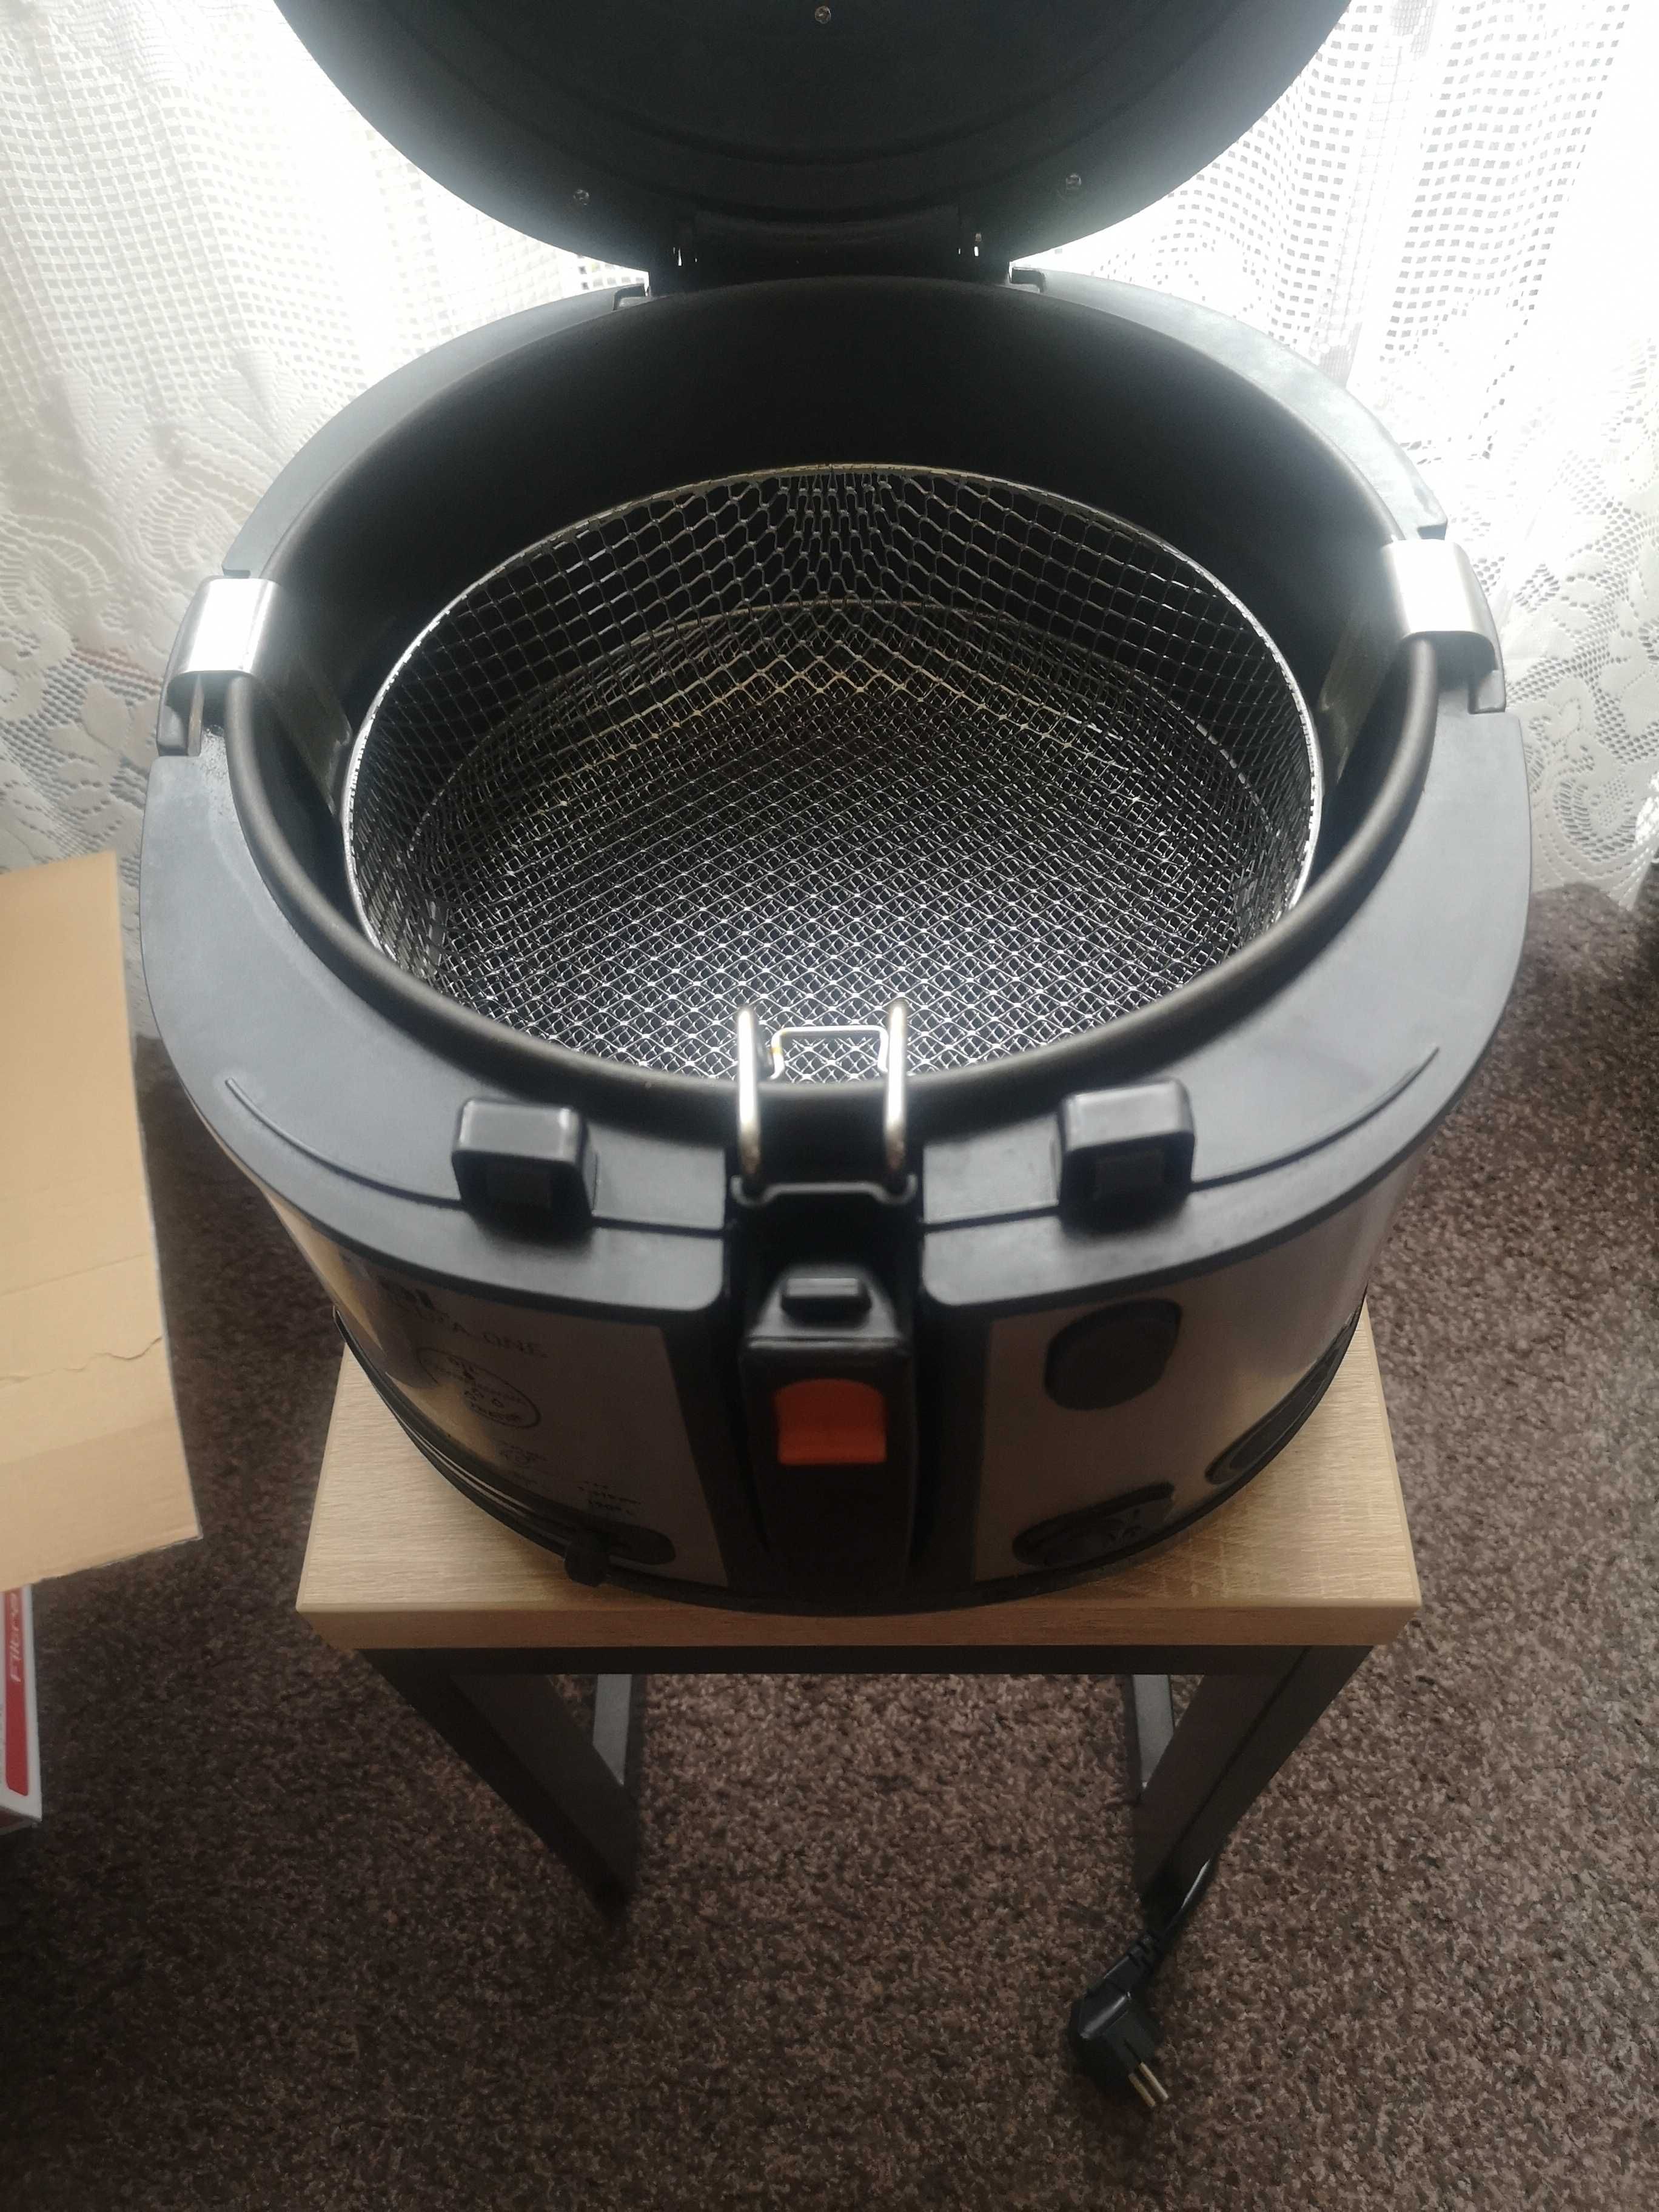 Frytkownica Tefal FF175D71 Filtra One